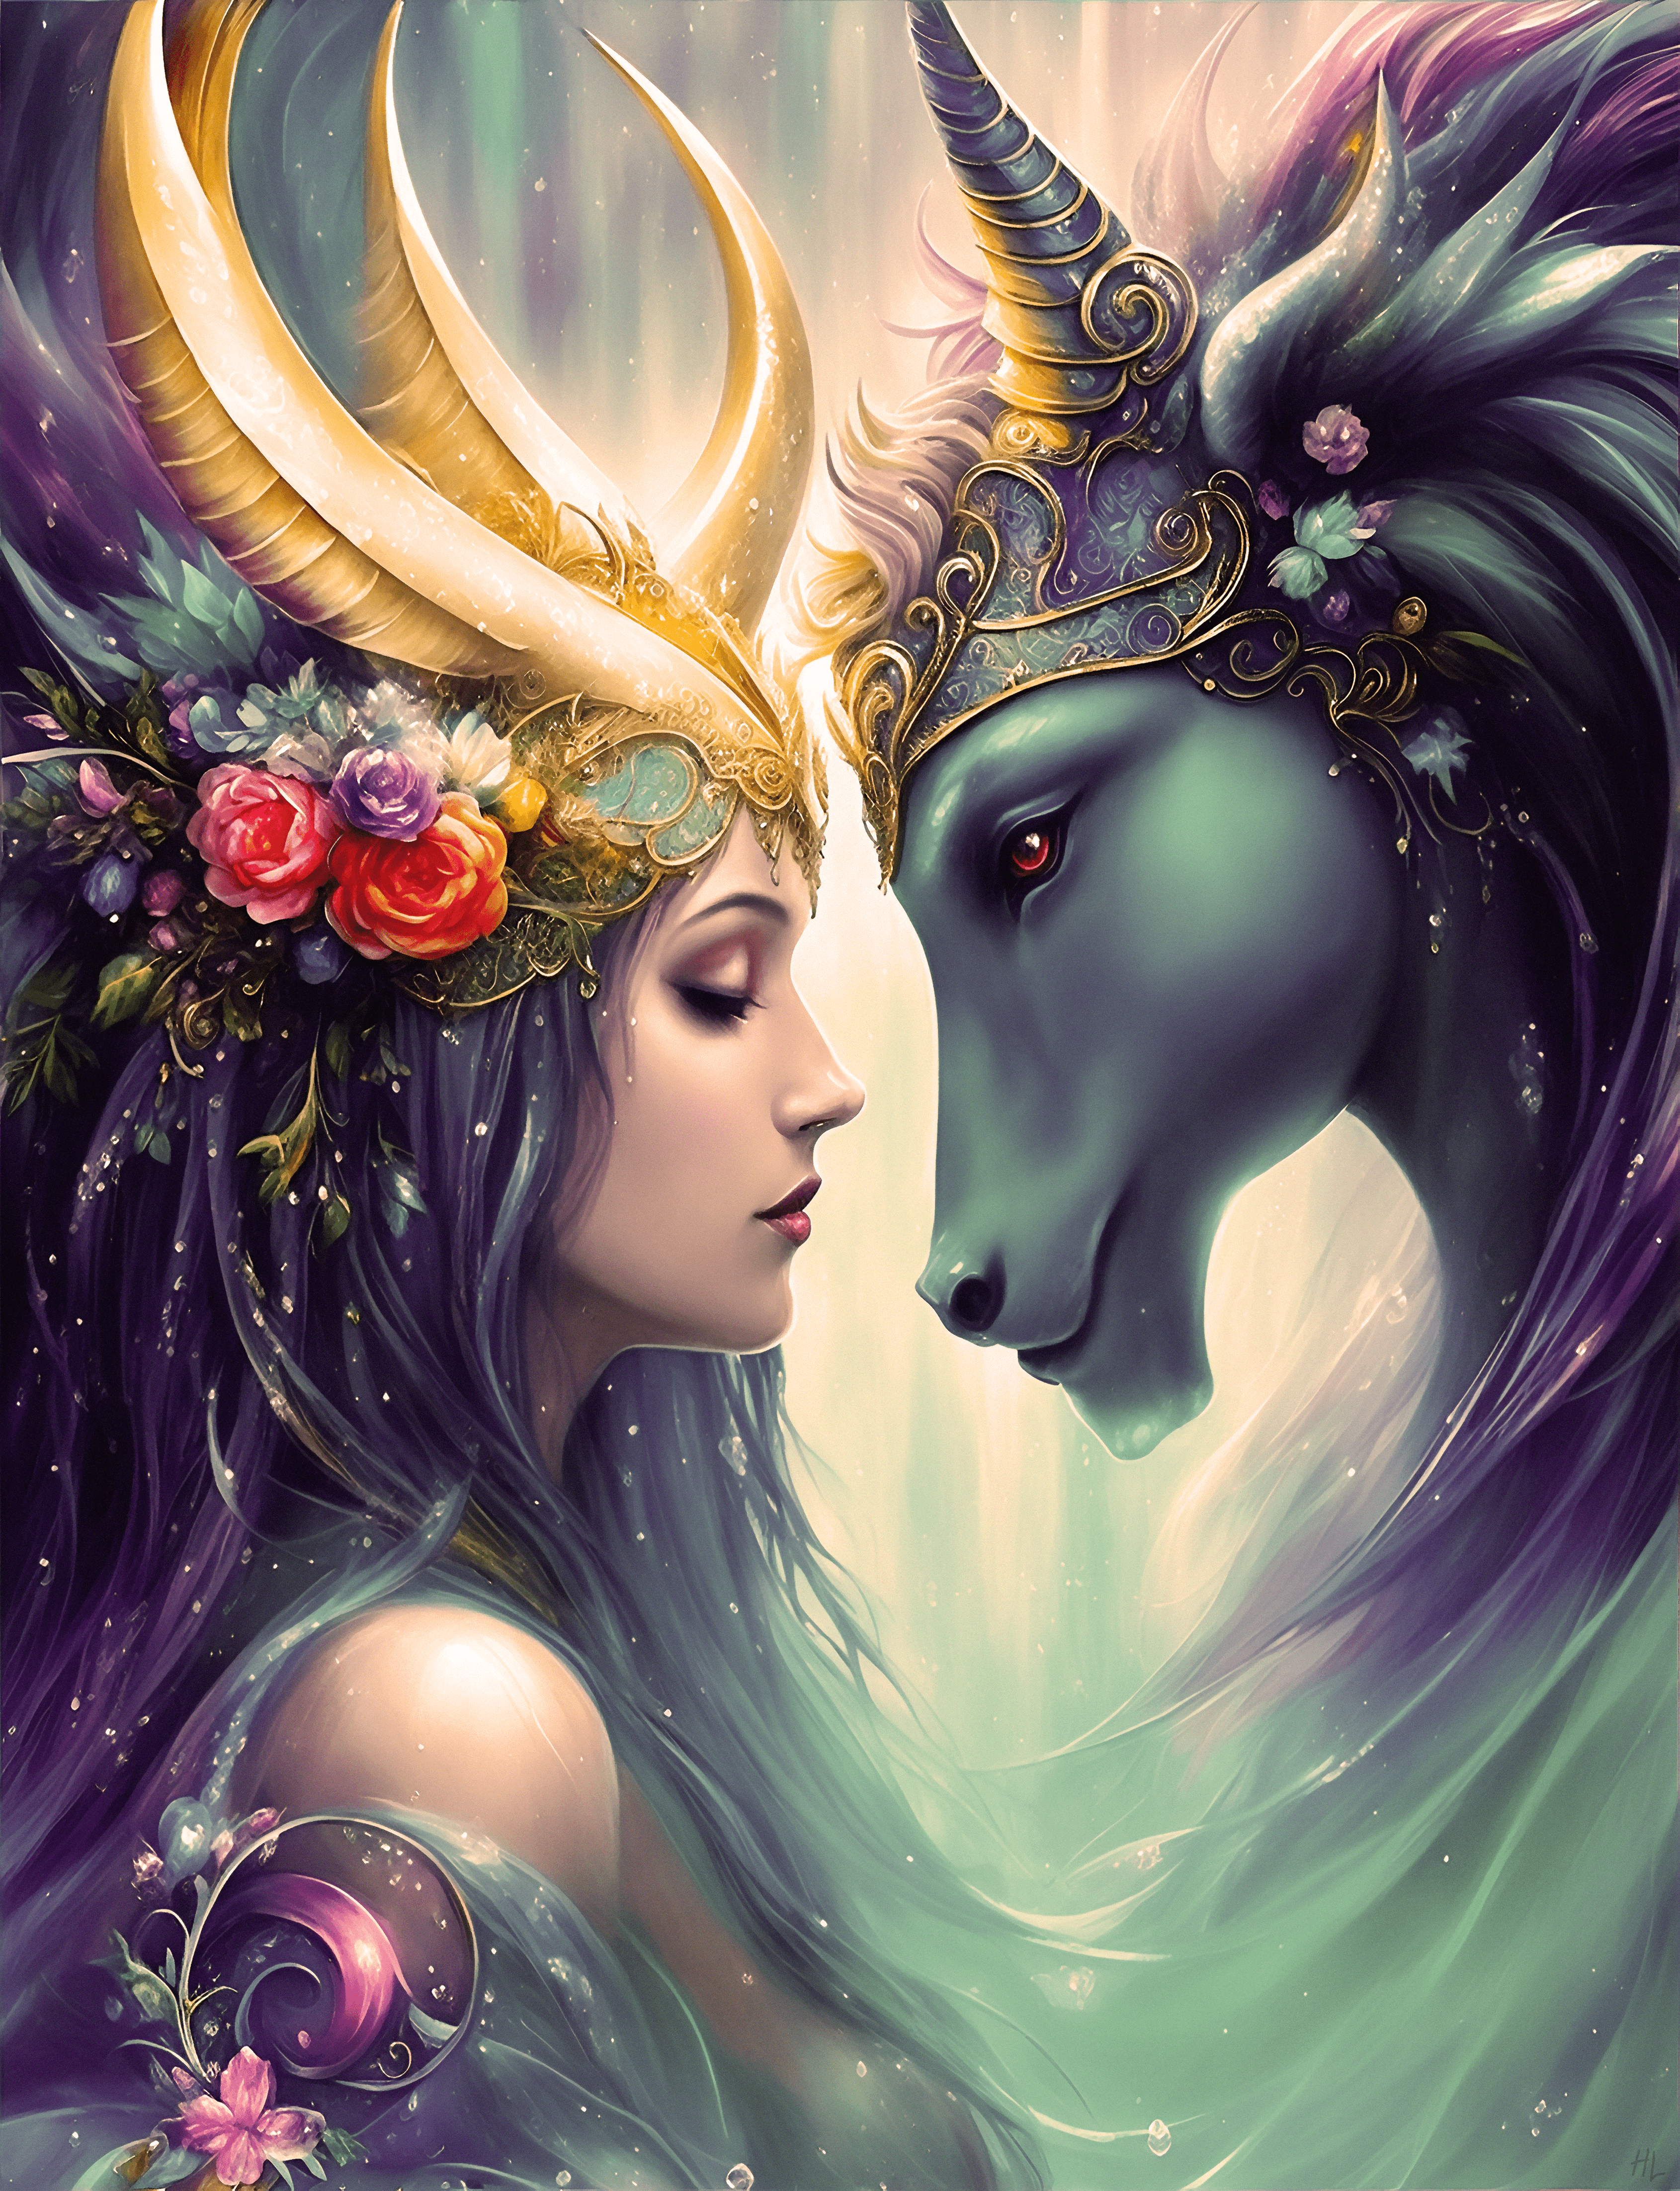 mythical creatures - princess and prince